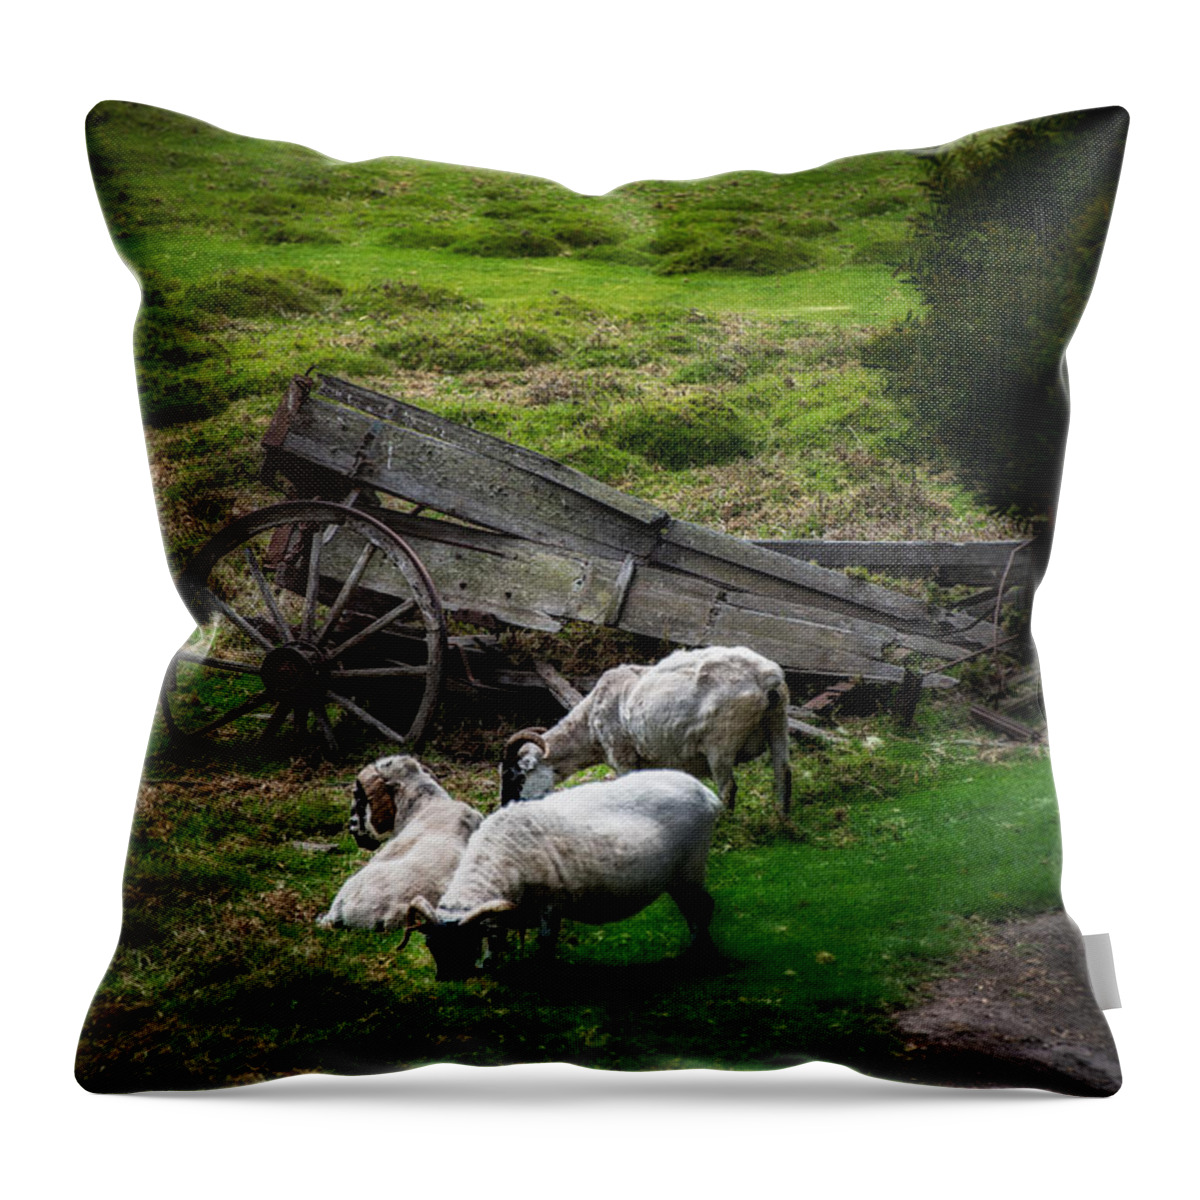 California Throw Pillow featuring the photograph Clint's Sheep by Patrick Boening